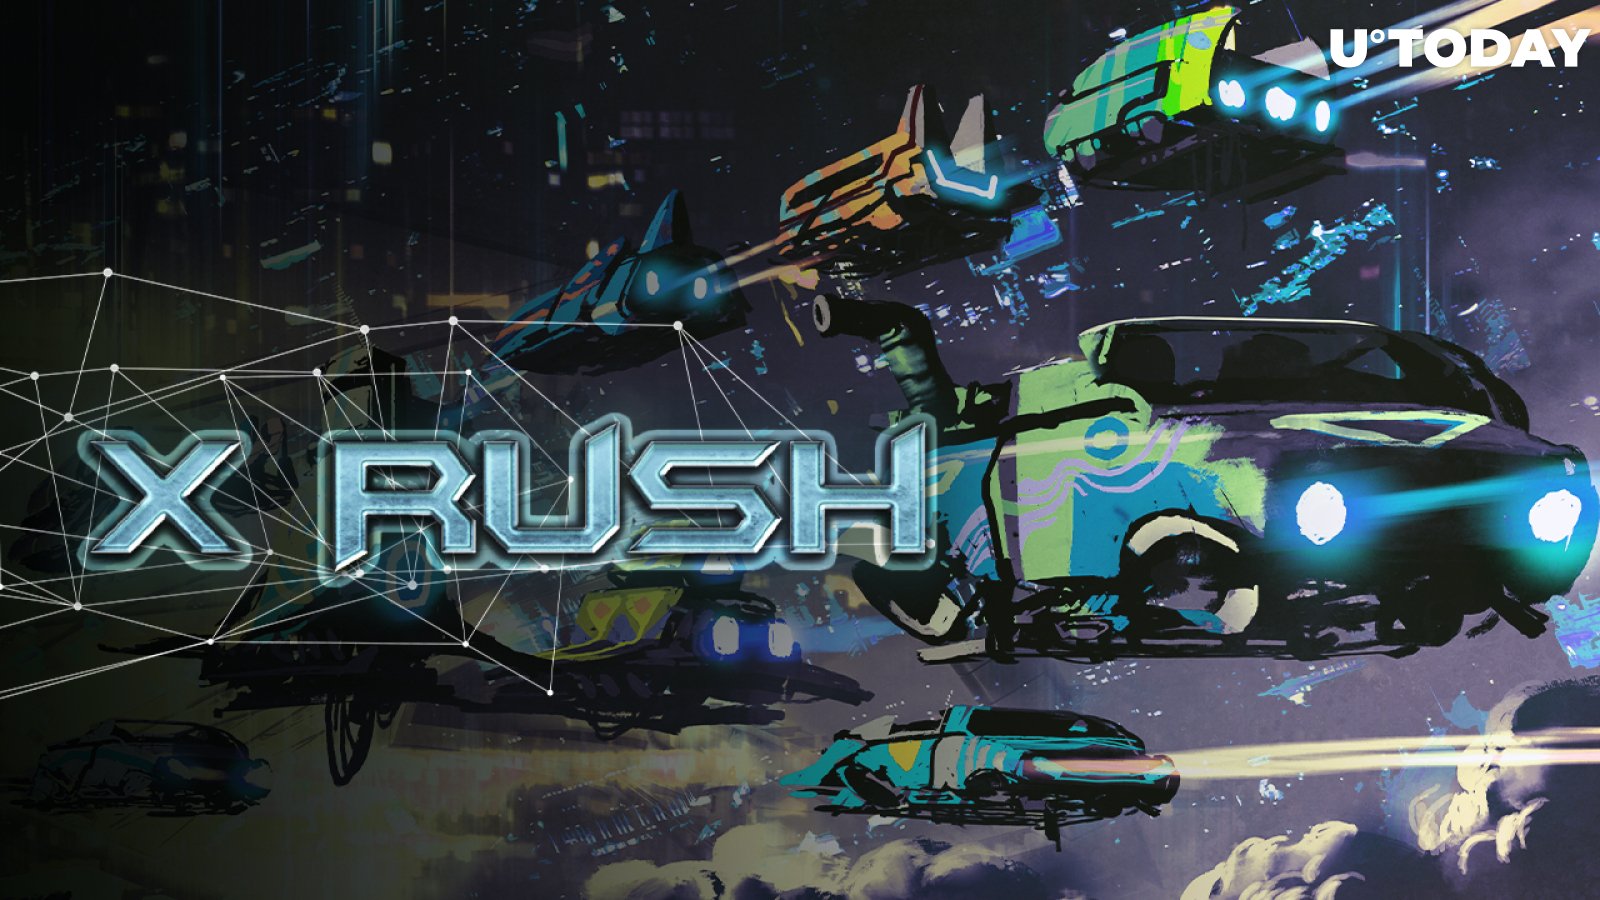 X Rush to Offer Giveaway Following Website Update